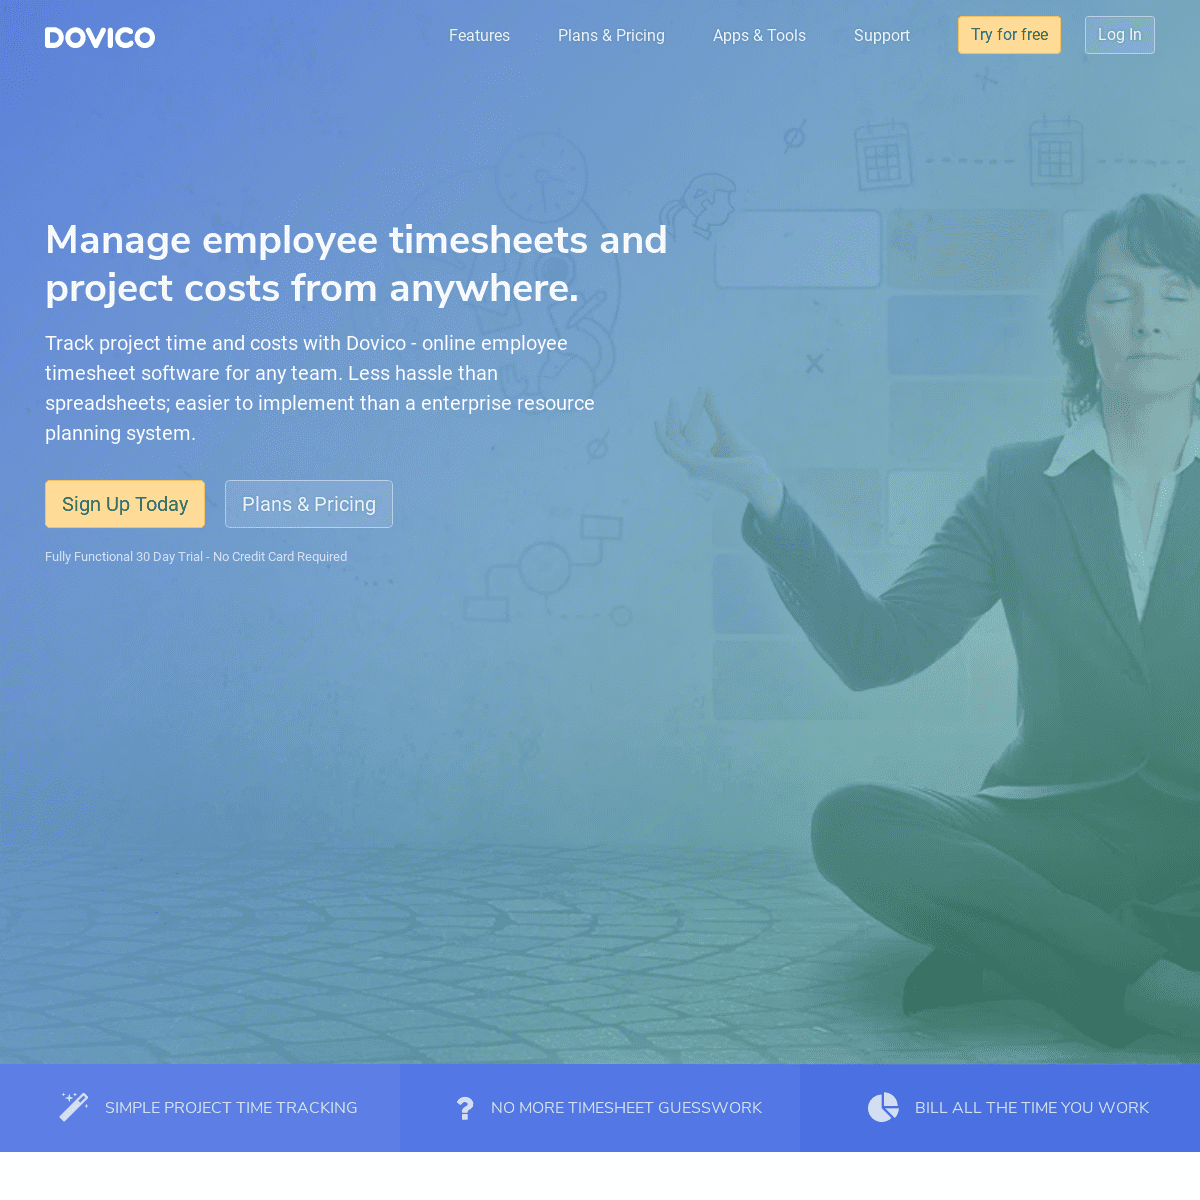 A complete backup of https://dovico.com